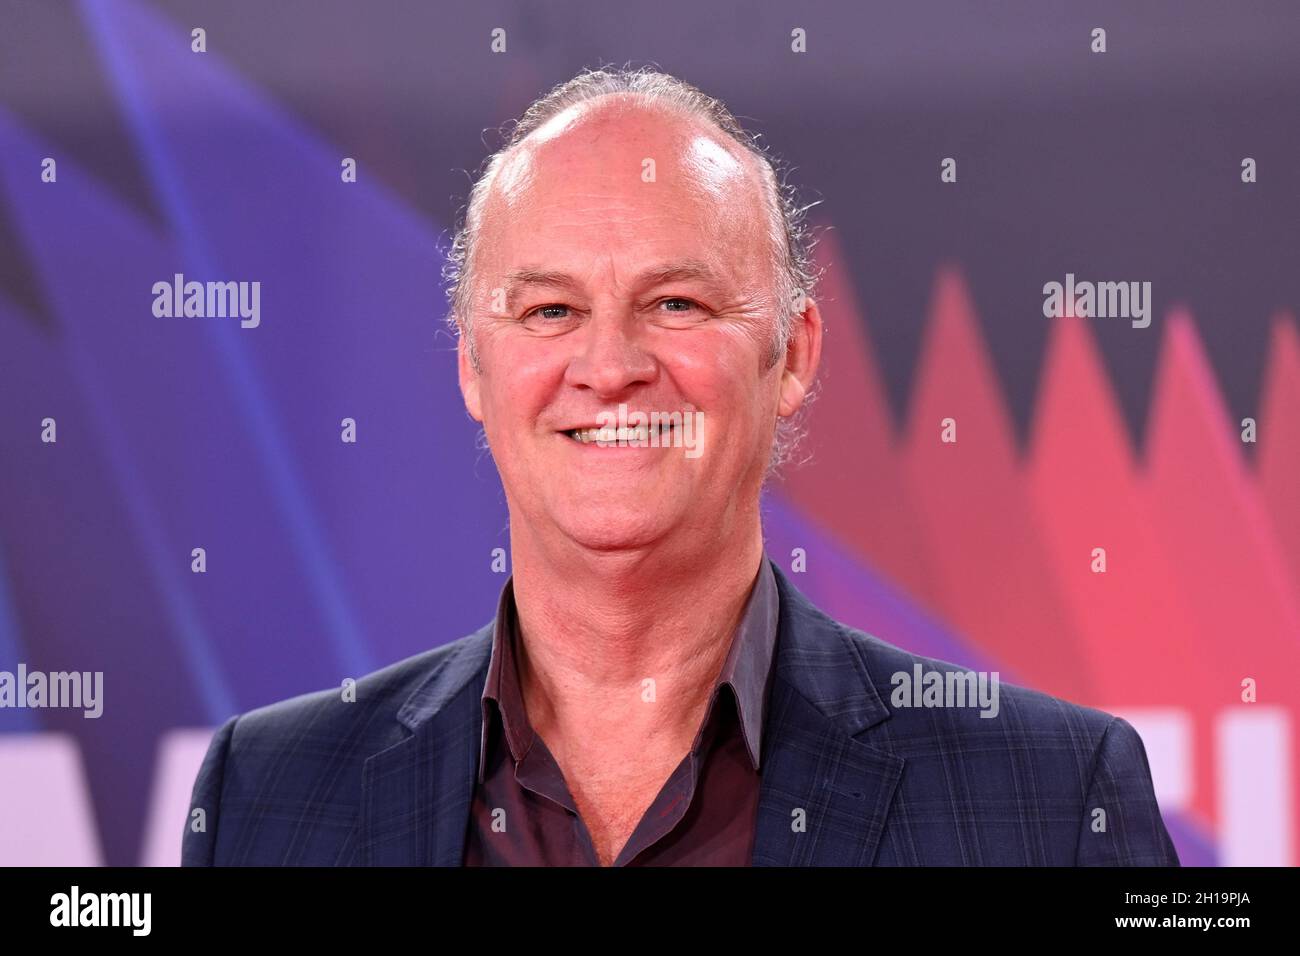 London, UK. 17 October 2021. Tim McInnerny arriving for the premiere of The Tragedy of Macbeth, at the Royal Festival Hall in London during the BFI London Film Festival. Picture date: Sunday October 17, 2021. Photo credit should read: Matt Crossick/Empics/Alamy Live News Stock Photo